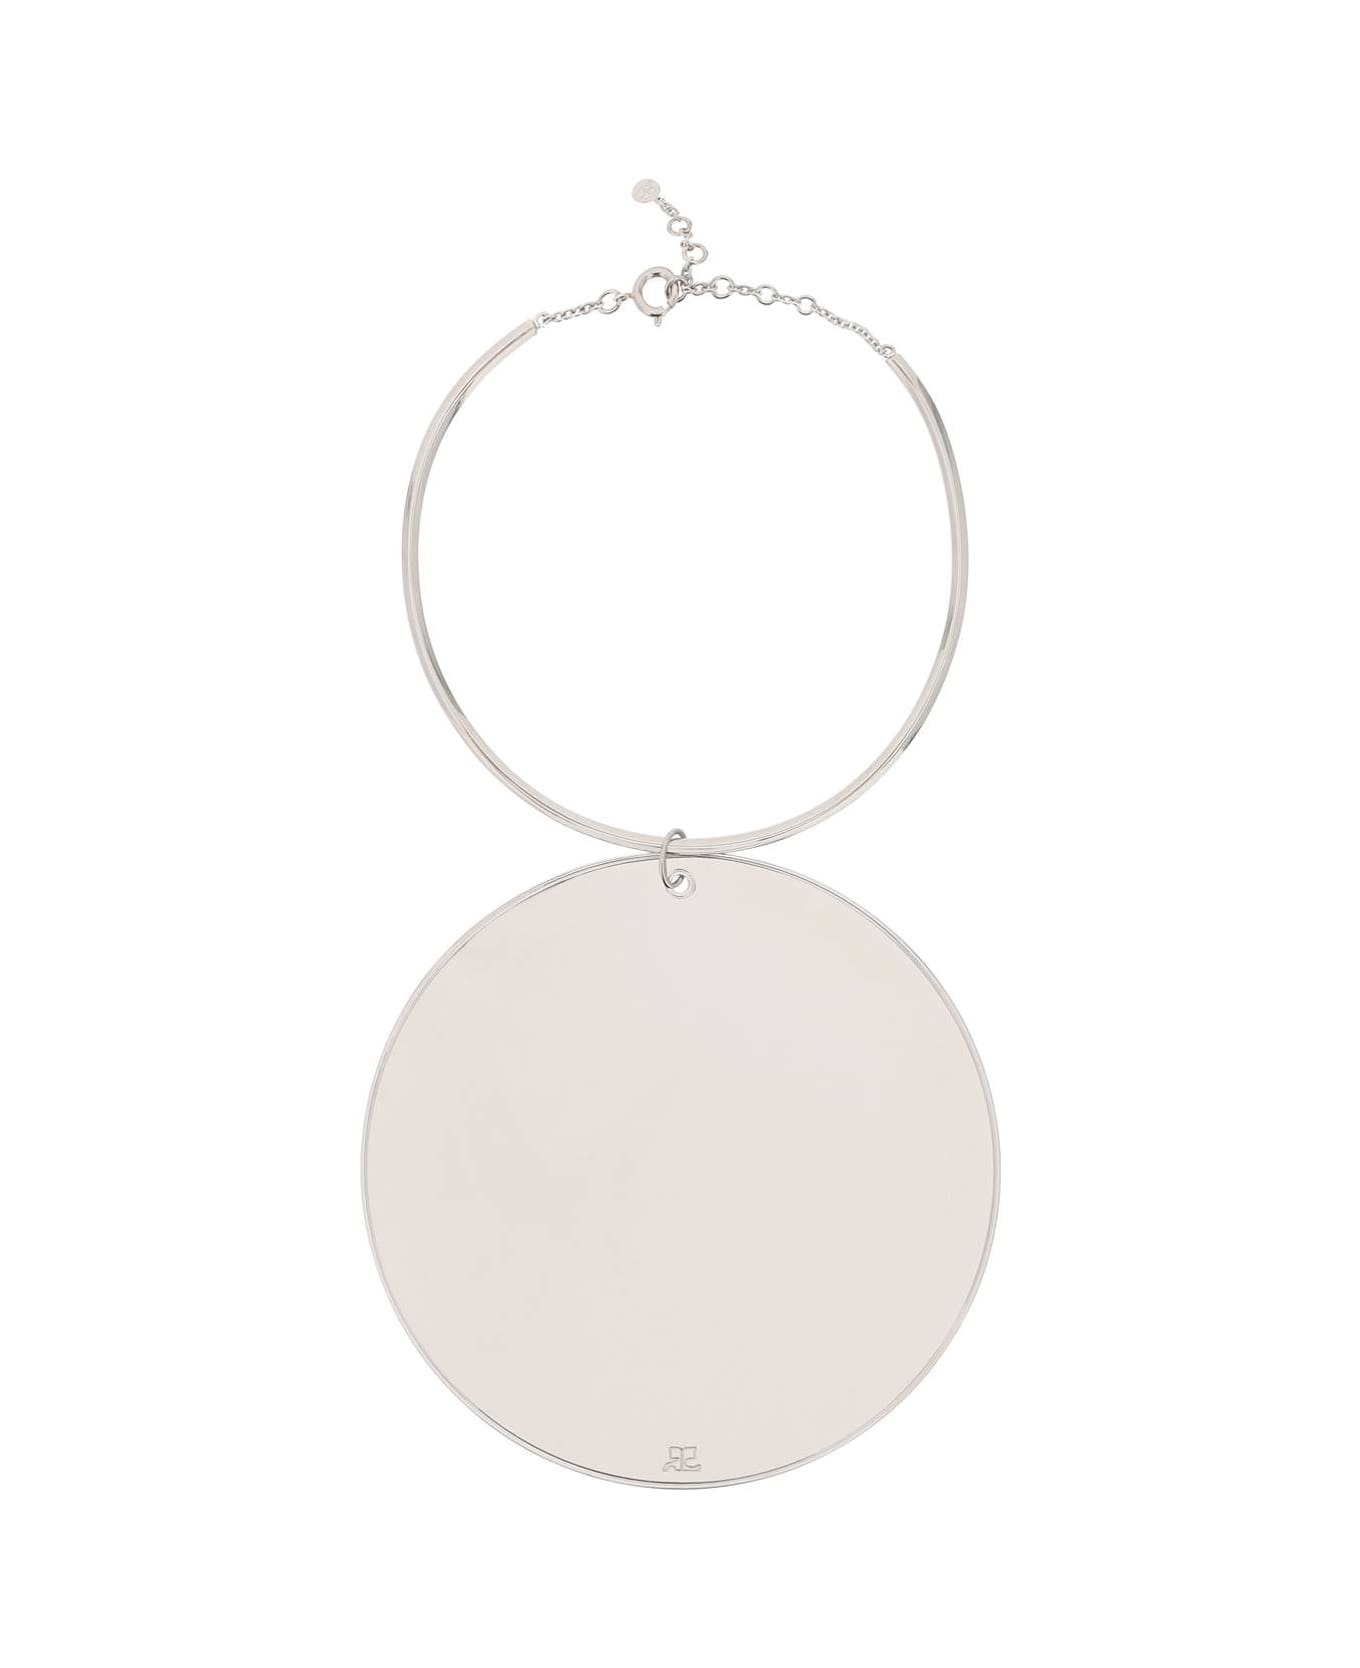 Courrèges Mirror Charm Necklace - SILVER (Silver) ネックレス